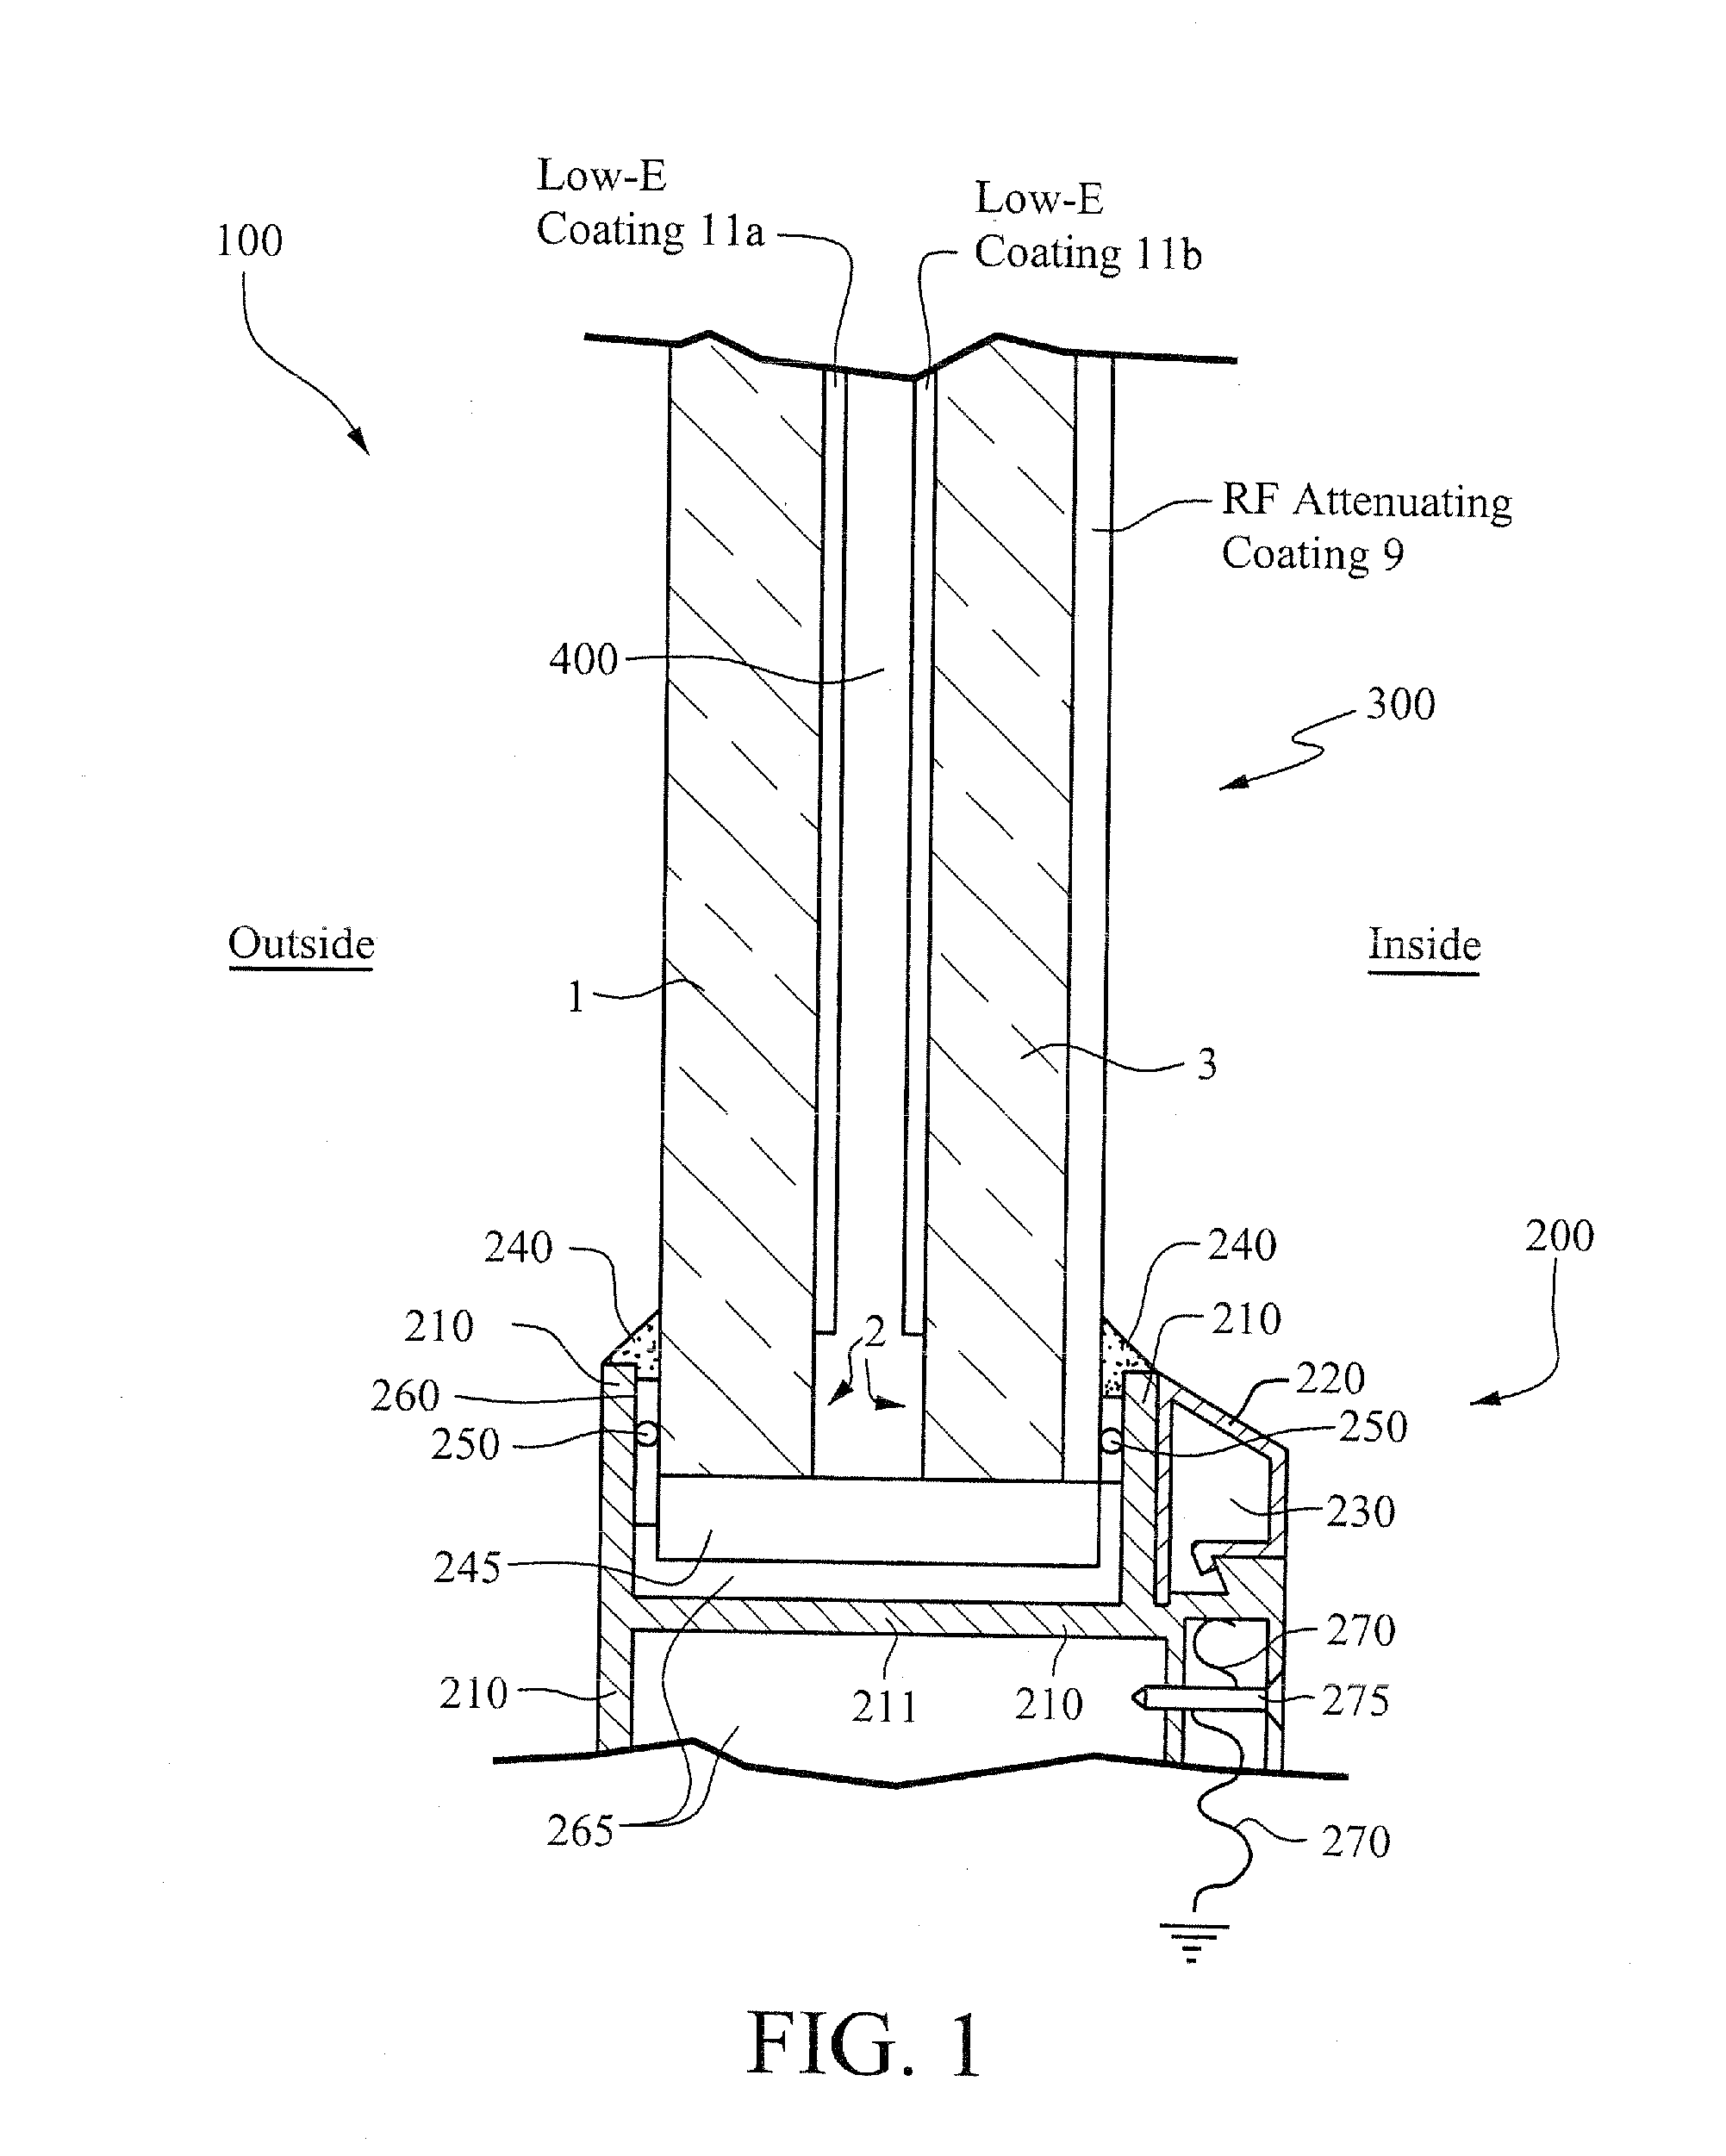 Window for attenuating RF and IR electromagnetic signals